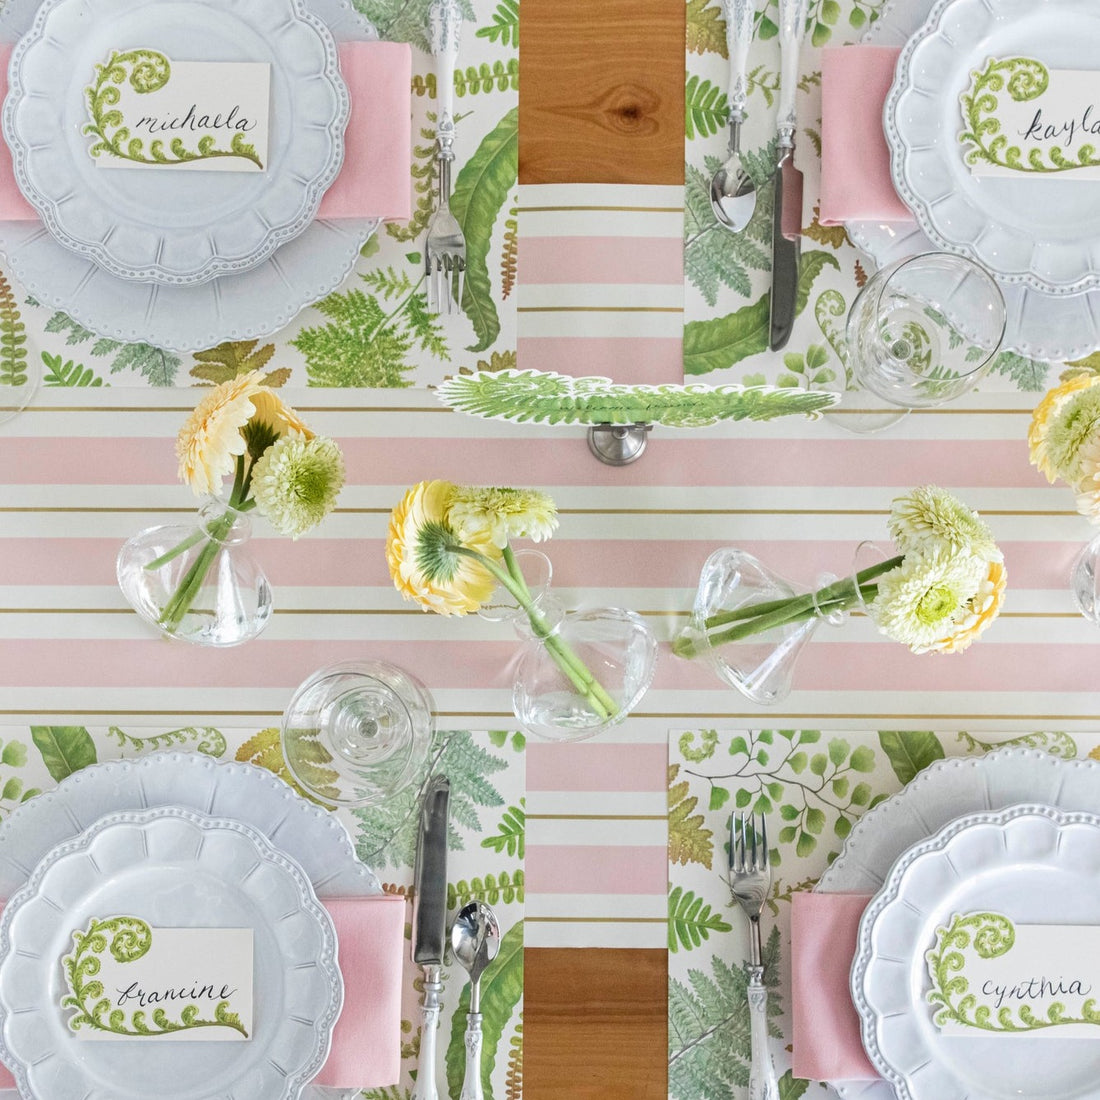 The Pink &amp; Gold Awning Stripe Runner under an elegant springtime table setting, from above.